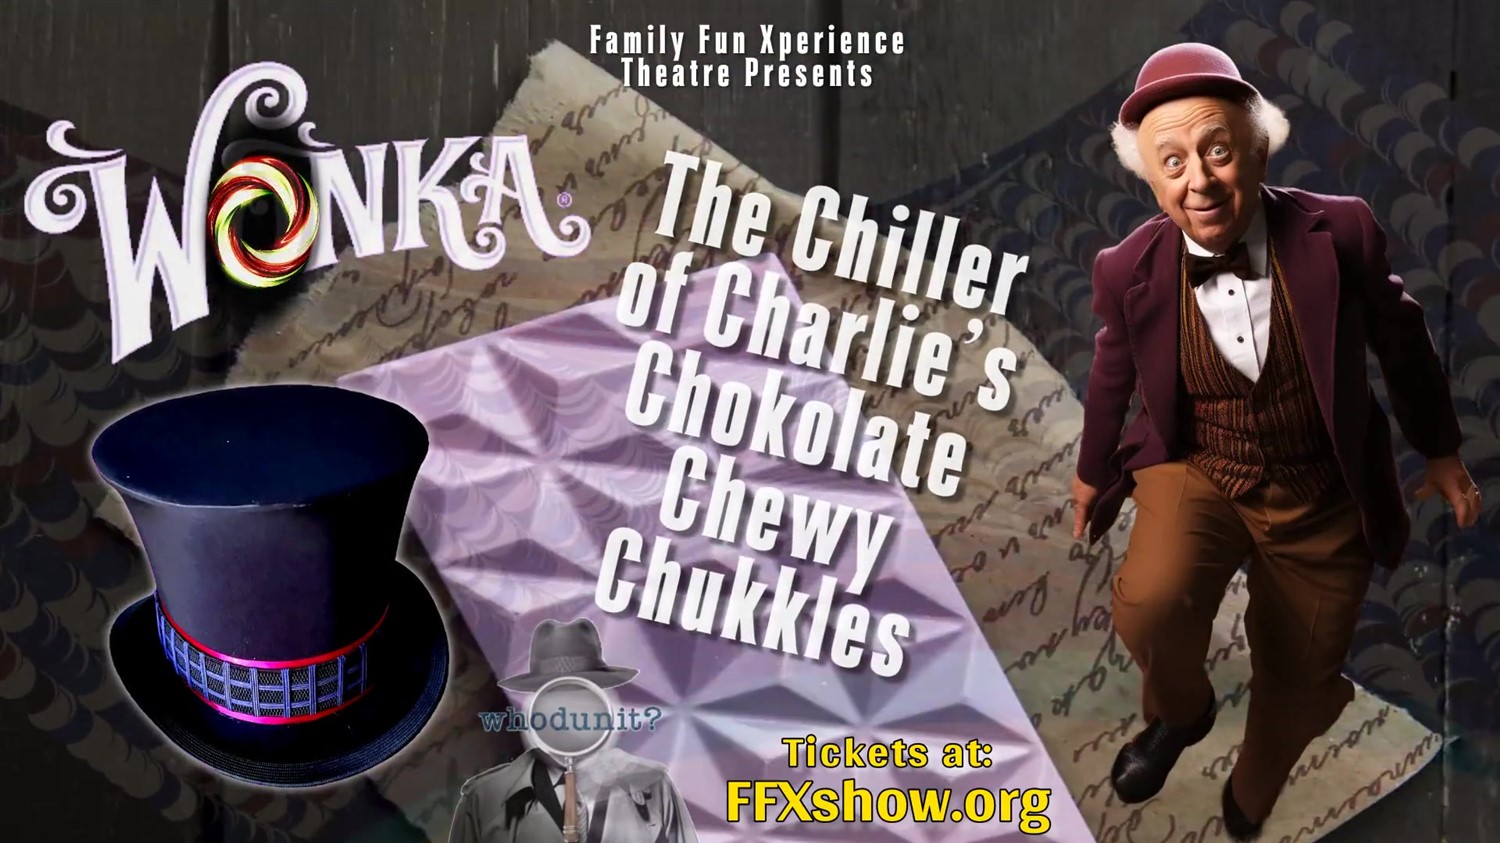 WHODUNIT? Charlie's Chukkles A Wonka-riffic Family-friendly Murder Mystery + Game Show on Mar 29, 19:00@FFX Theatre - Buy tickets and Get information on Family Fun Xperience tickets.ffxshow.org